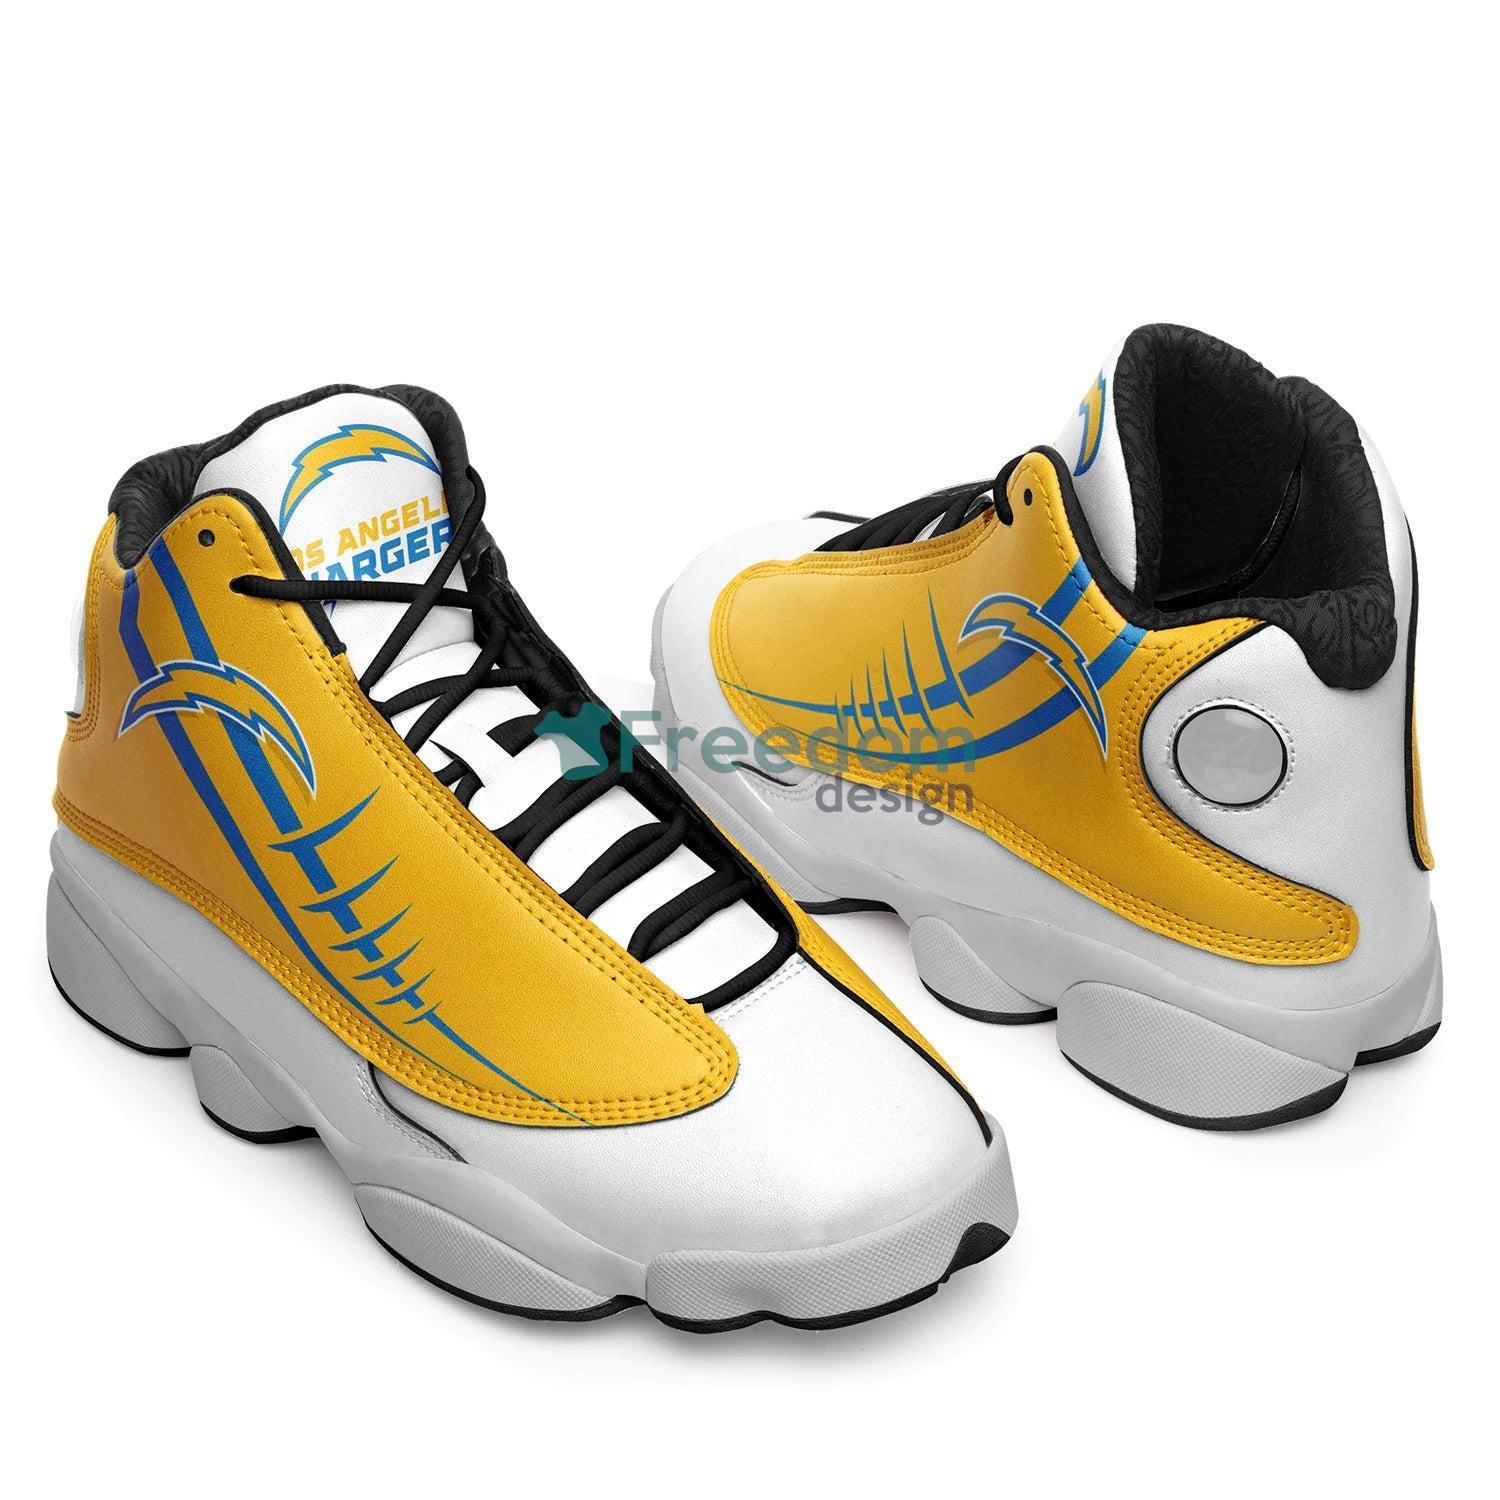 Los Angeles Chargers Fans Yellow Air Jordan 13 Sneaker Shoes For Fans